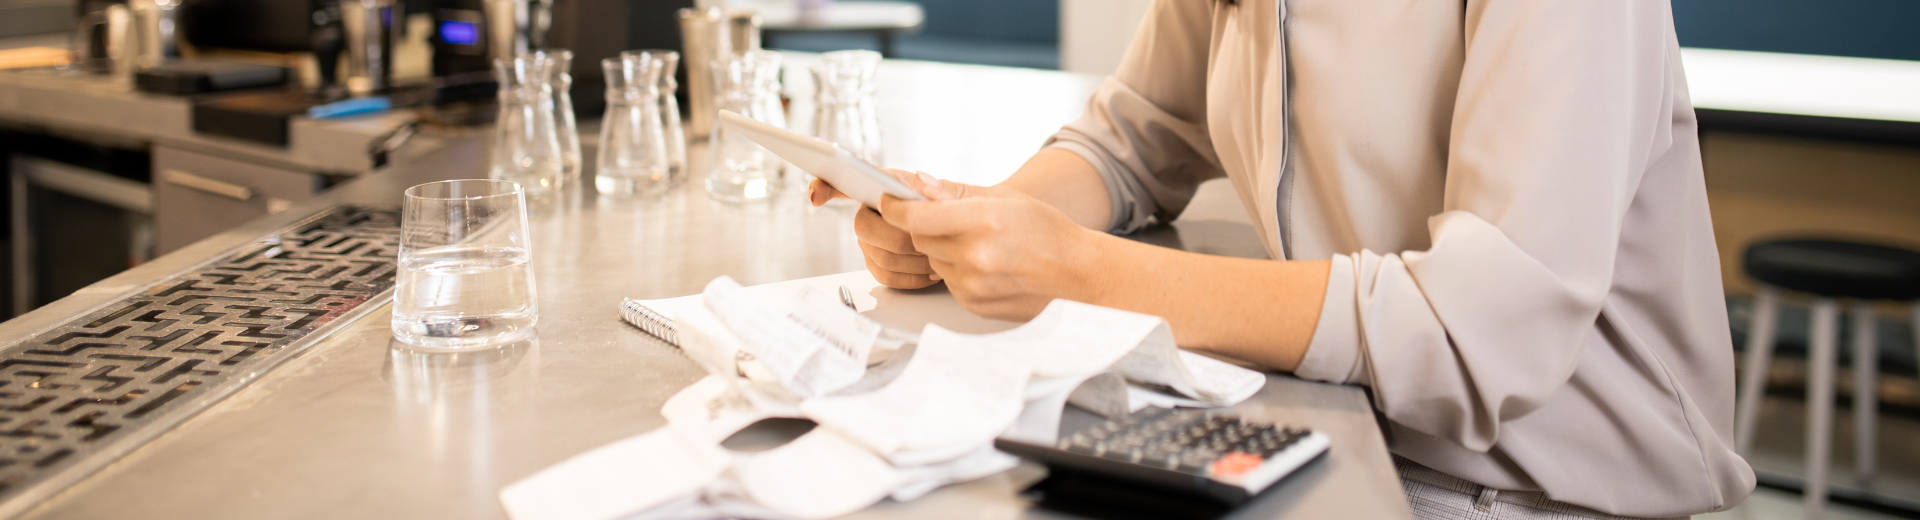 Restaurant owner calculating notes payables